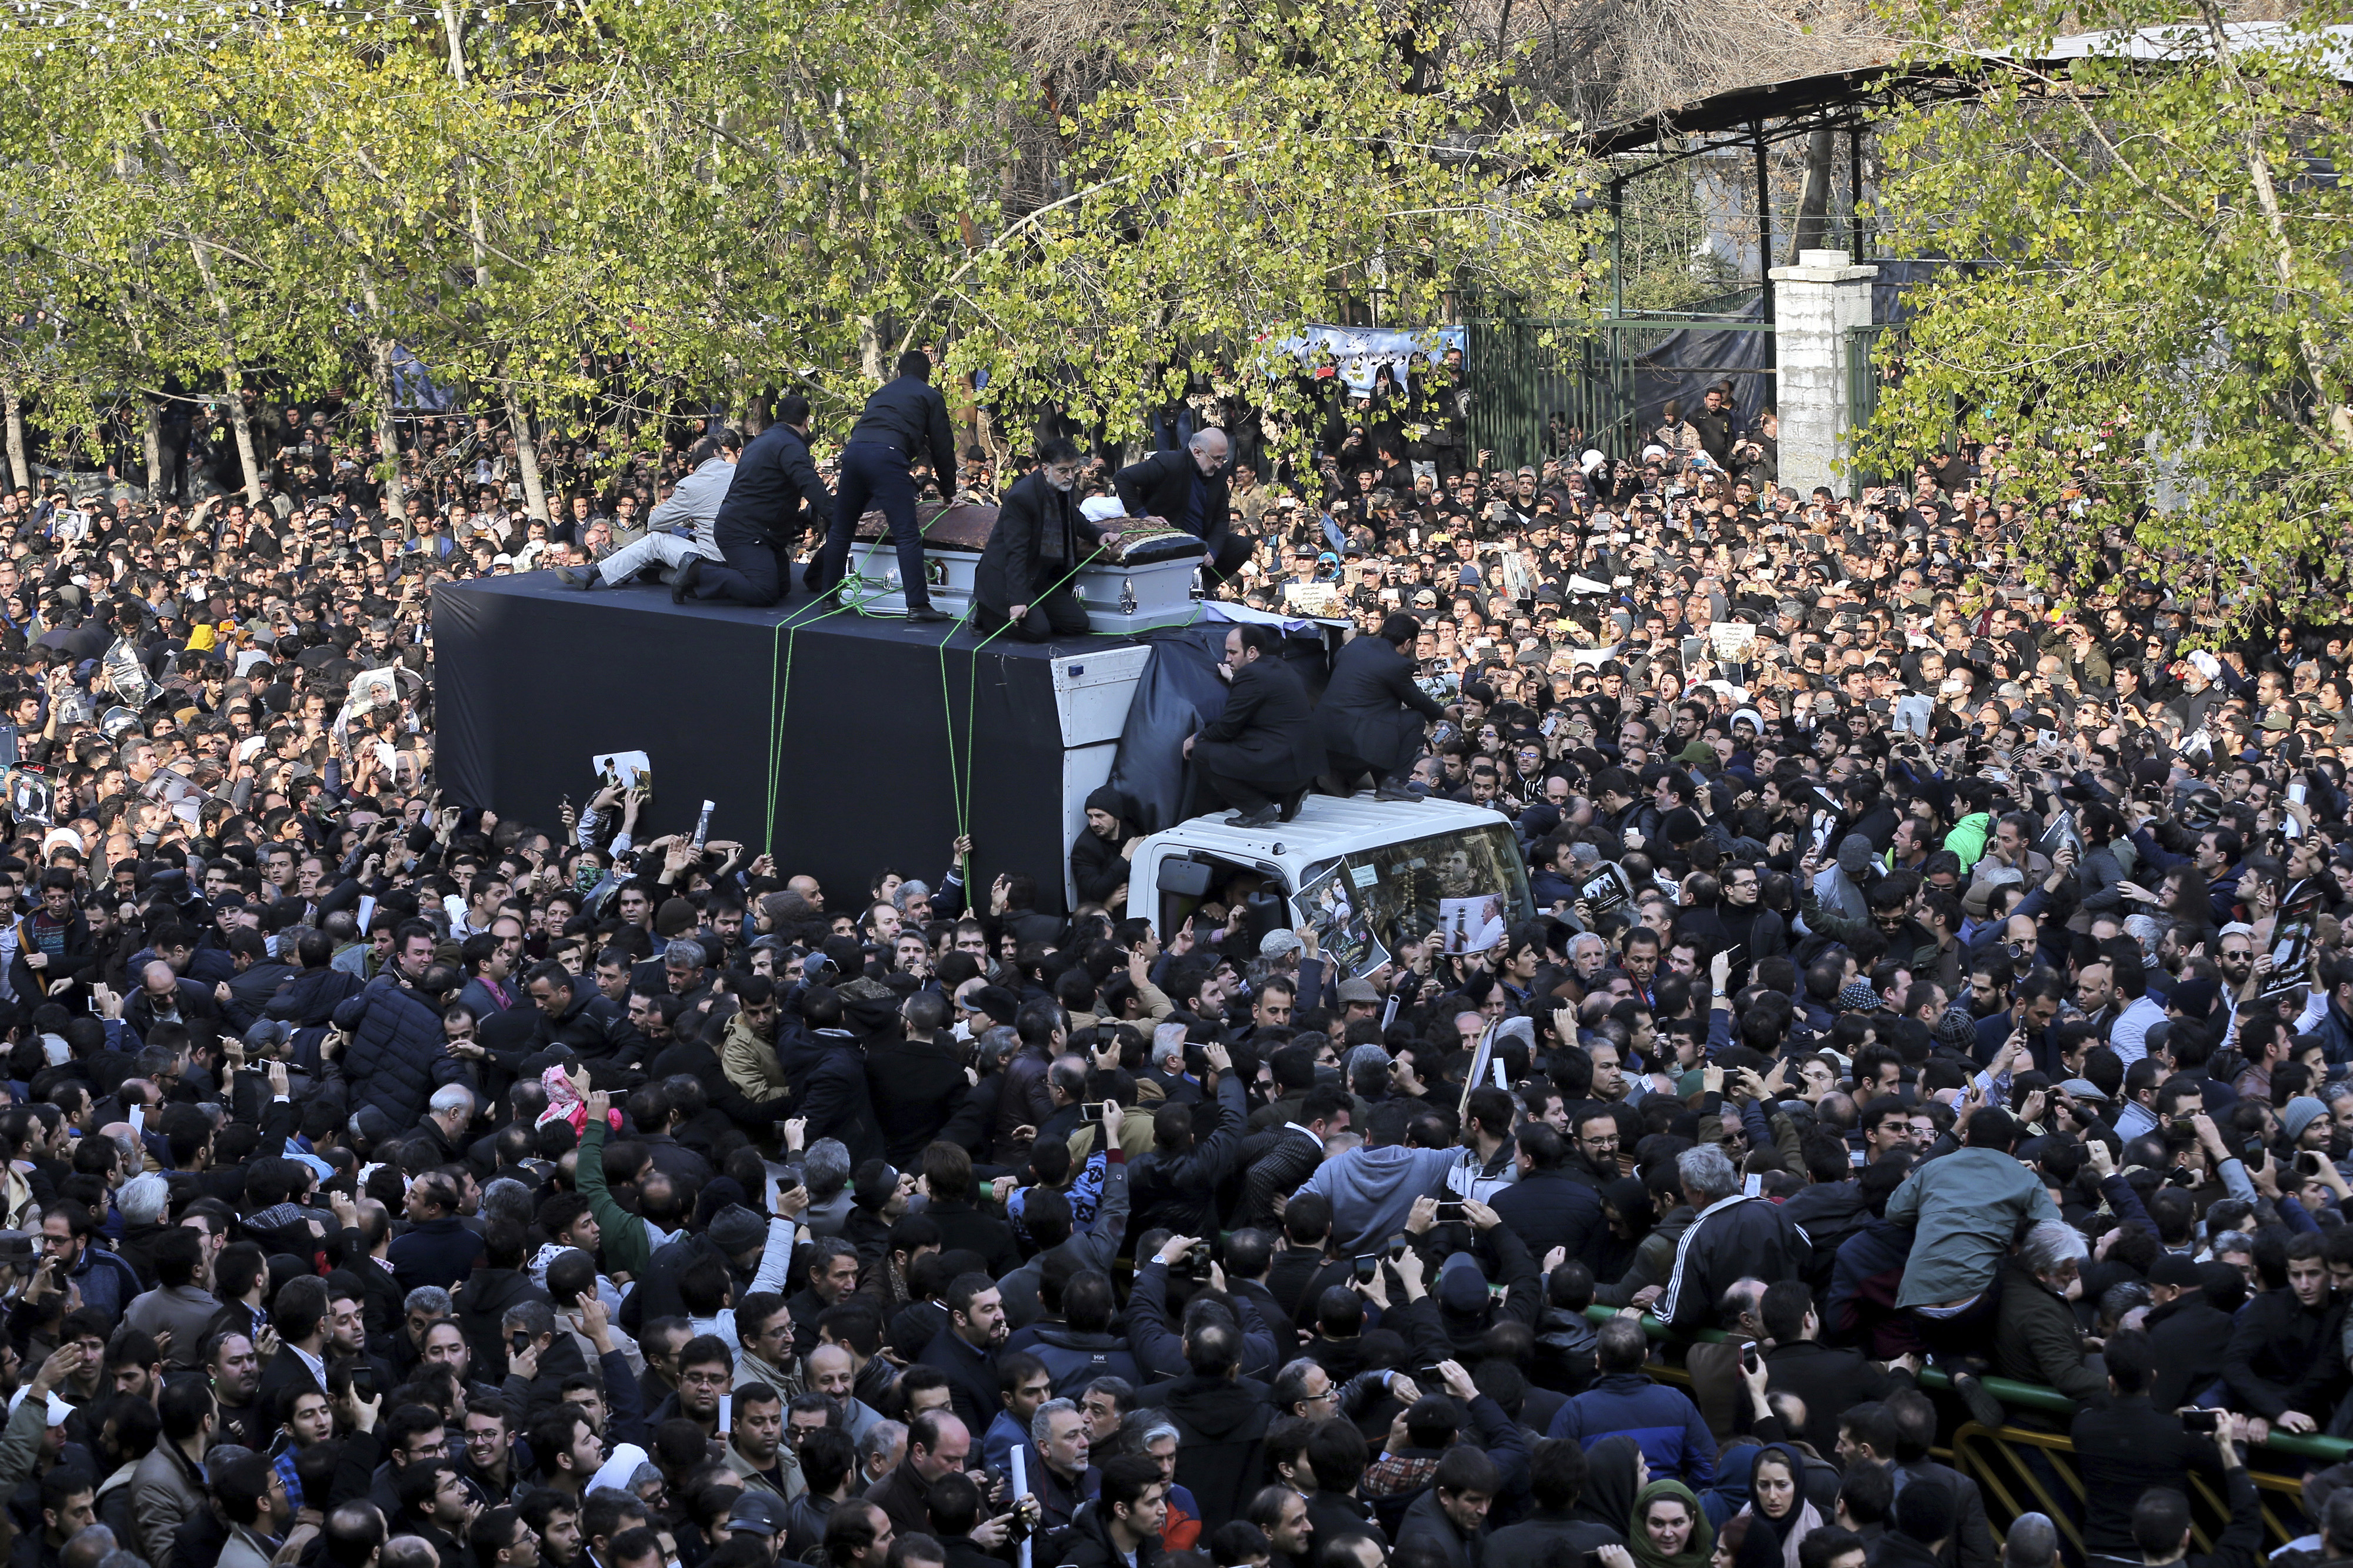 The coffin of former Iranian President Akbar Hashemi Rafsanjani, is carried on a truck surrounded by mourners during his funeral in Tehran, Iran, Tuesday, Jan. 10, 2017. Hundreds of thousands of mourners have flooded the streets of Tehran, beating their chests and wailing in grief for Rafsanjani, who died over the weekend at the age of 82. The crowds have filled main thoroughfares of the capital as top government and clerical officials held a funeral service at Tehran University. (AP Photo/Ebrahim Noroozi)